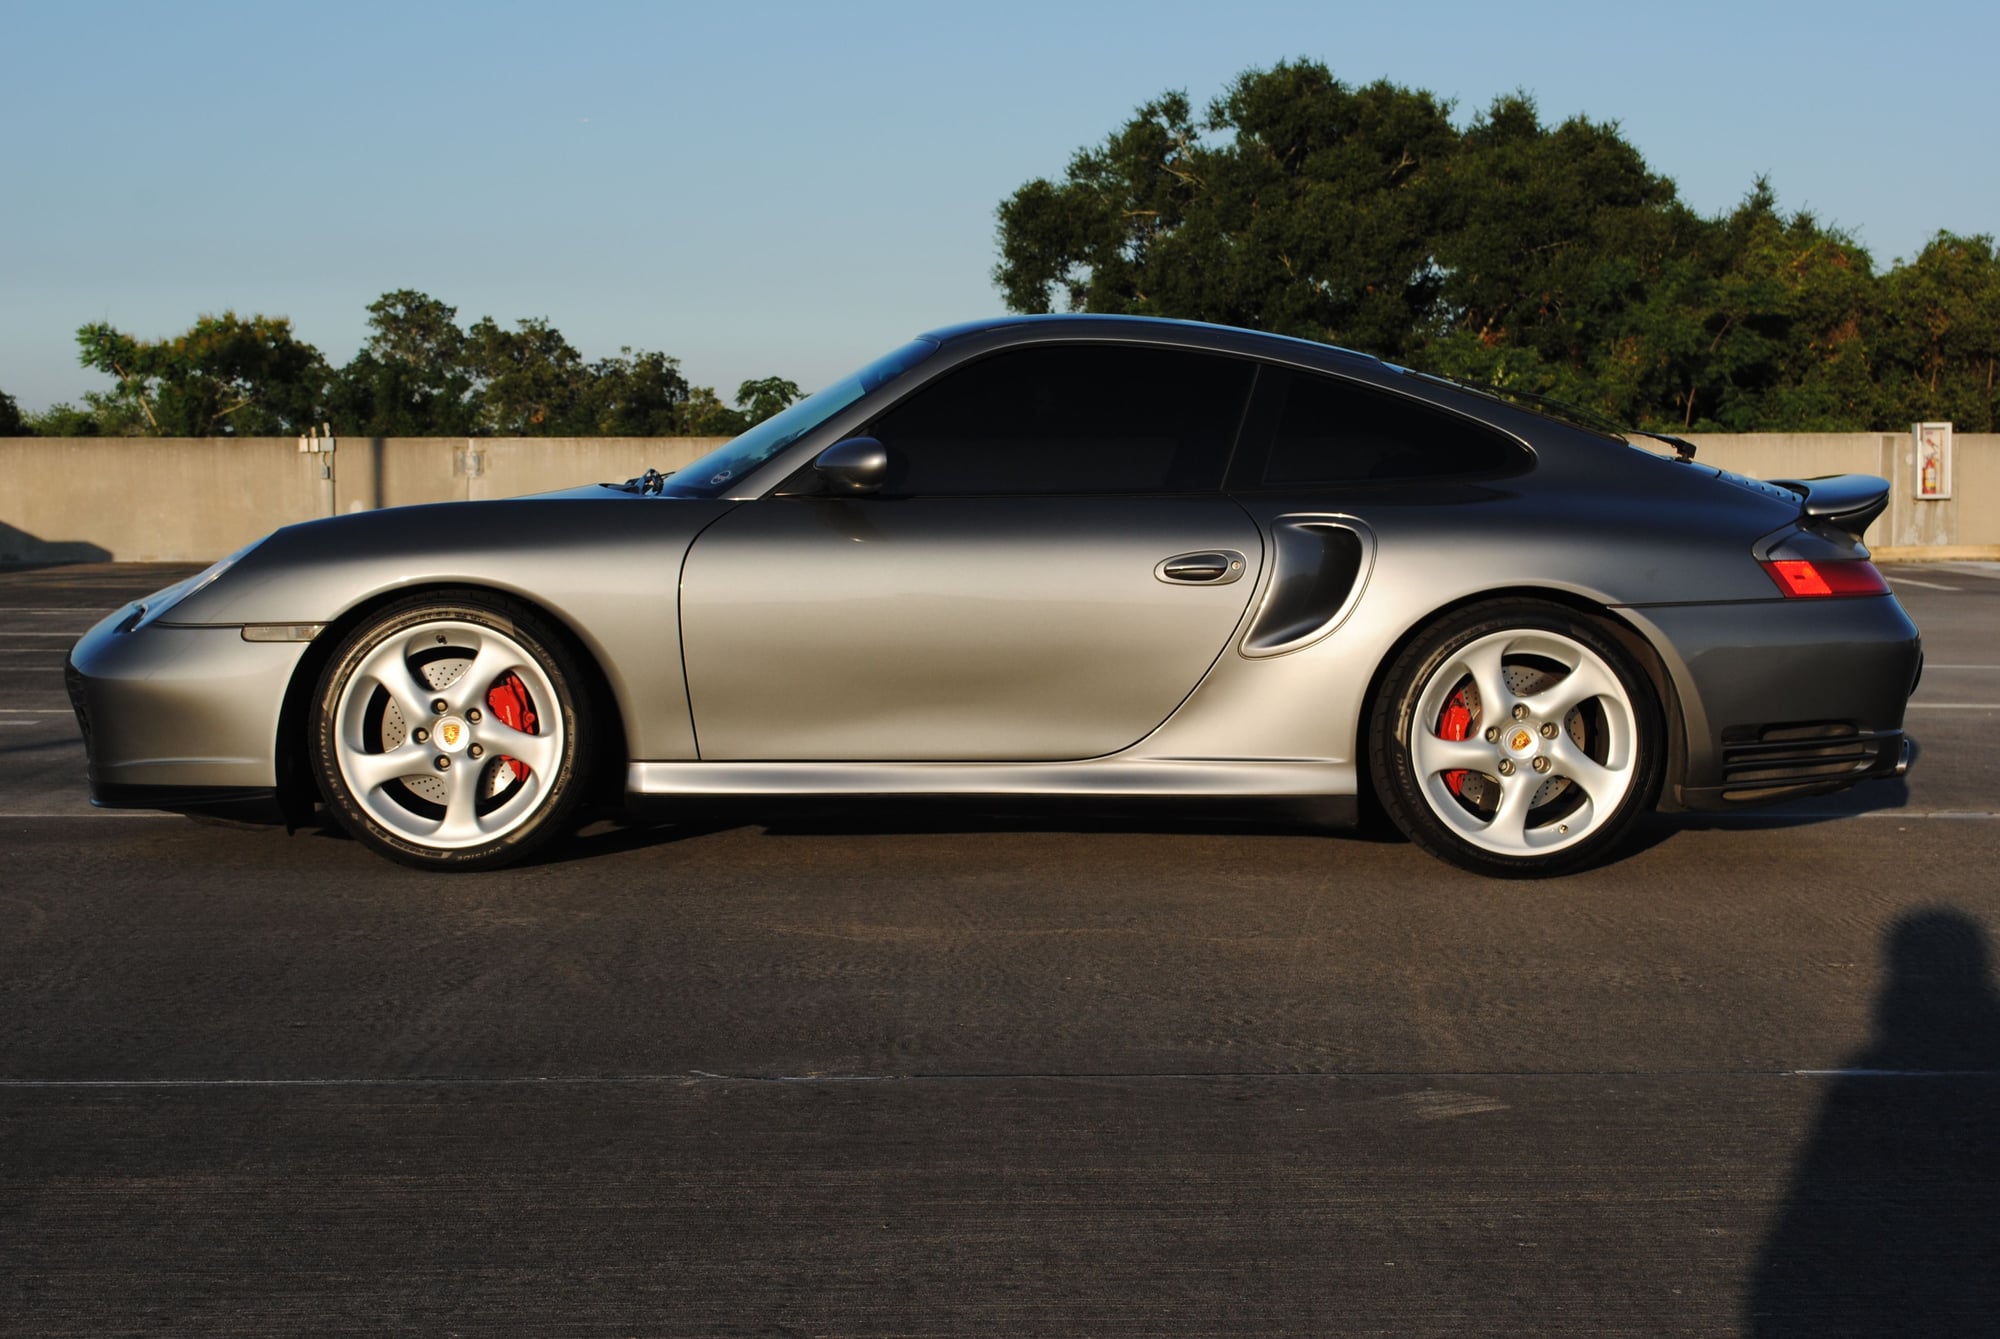 2003 Porsche 911 - 2003 996 911 Turbo | Manual | Coupe - Used - VIN WP0AB29973S687028 - 59,350 Miles - 6 cyl - AWD - Manual - Coupe - Gray - Orlando, FL 32751, United States